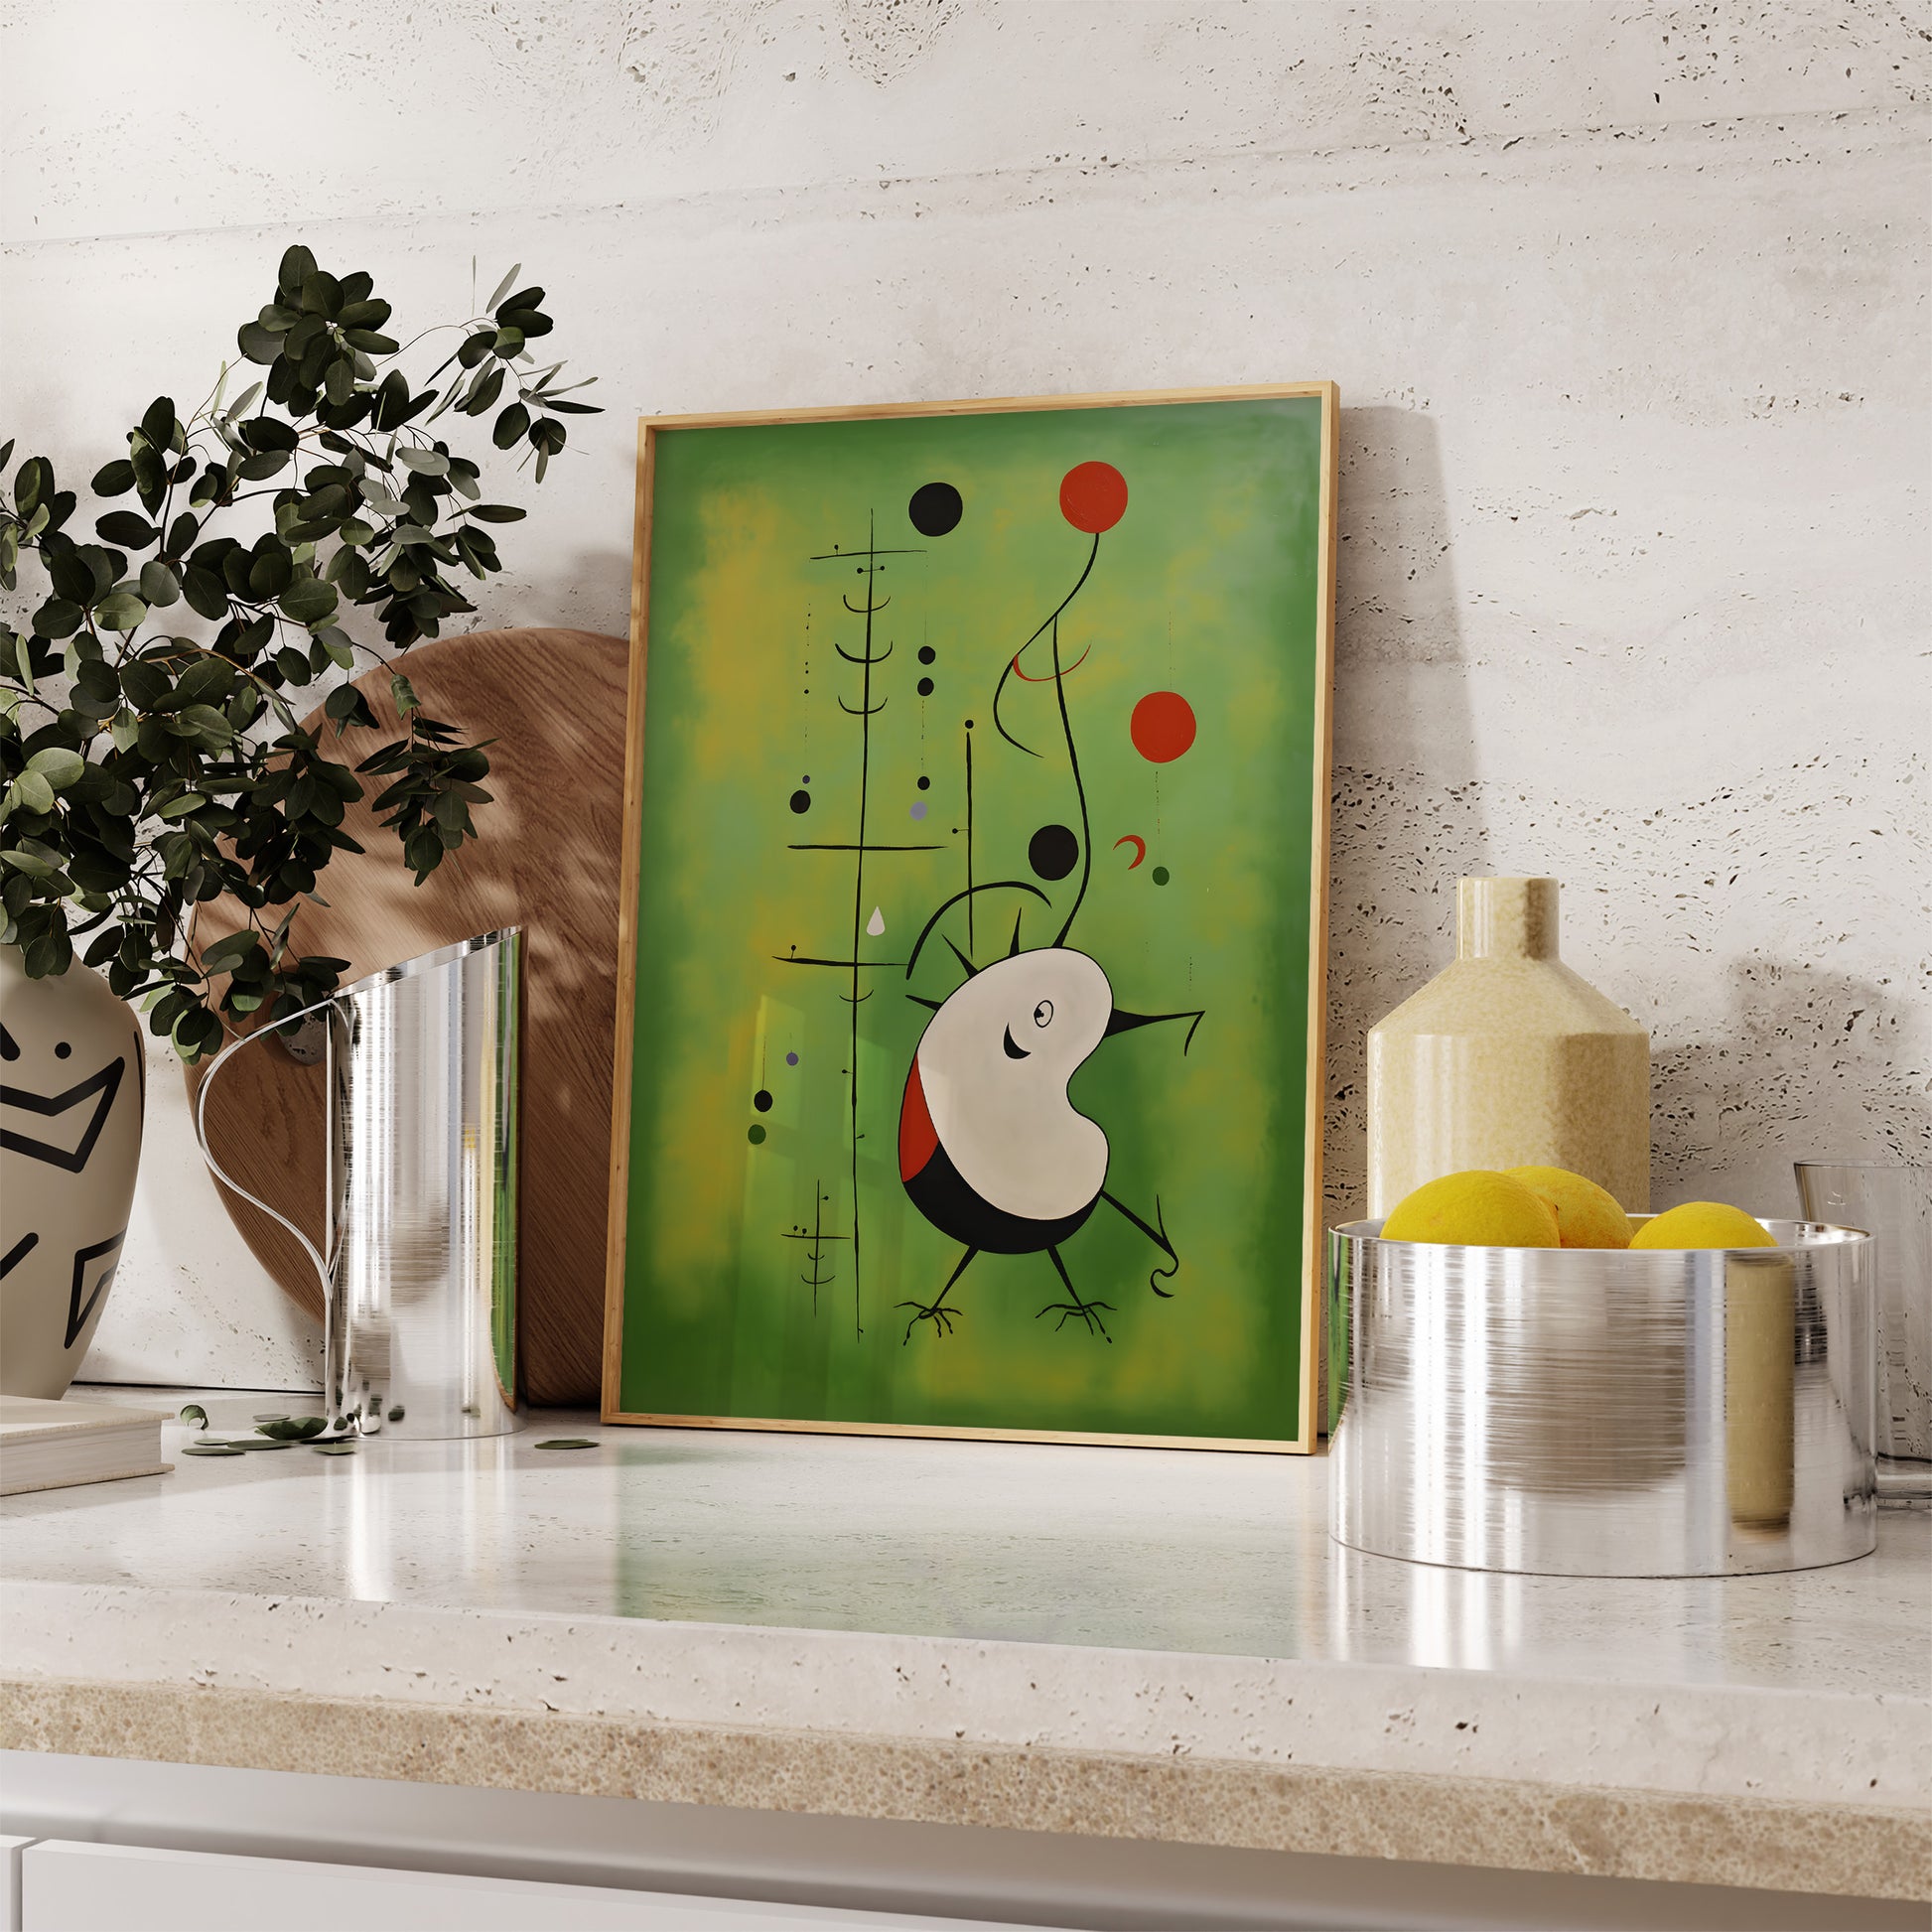 Abstract art with quirky bird-like figure on kitchen countertop.